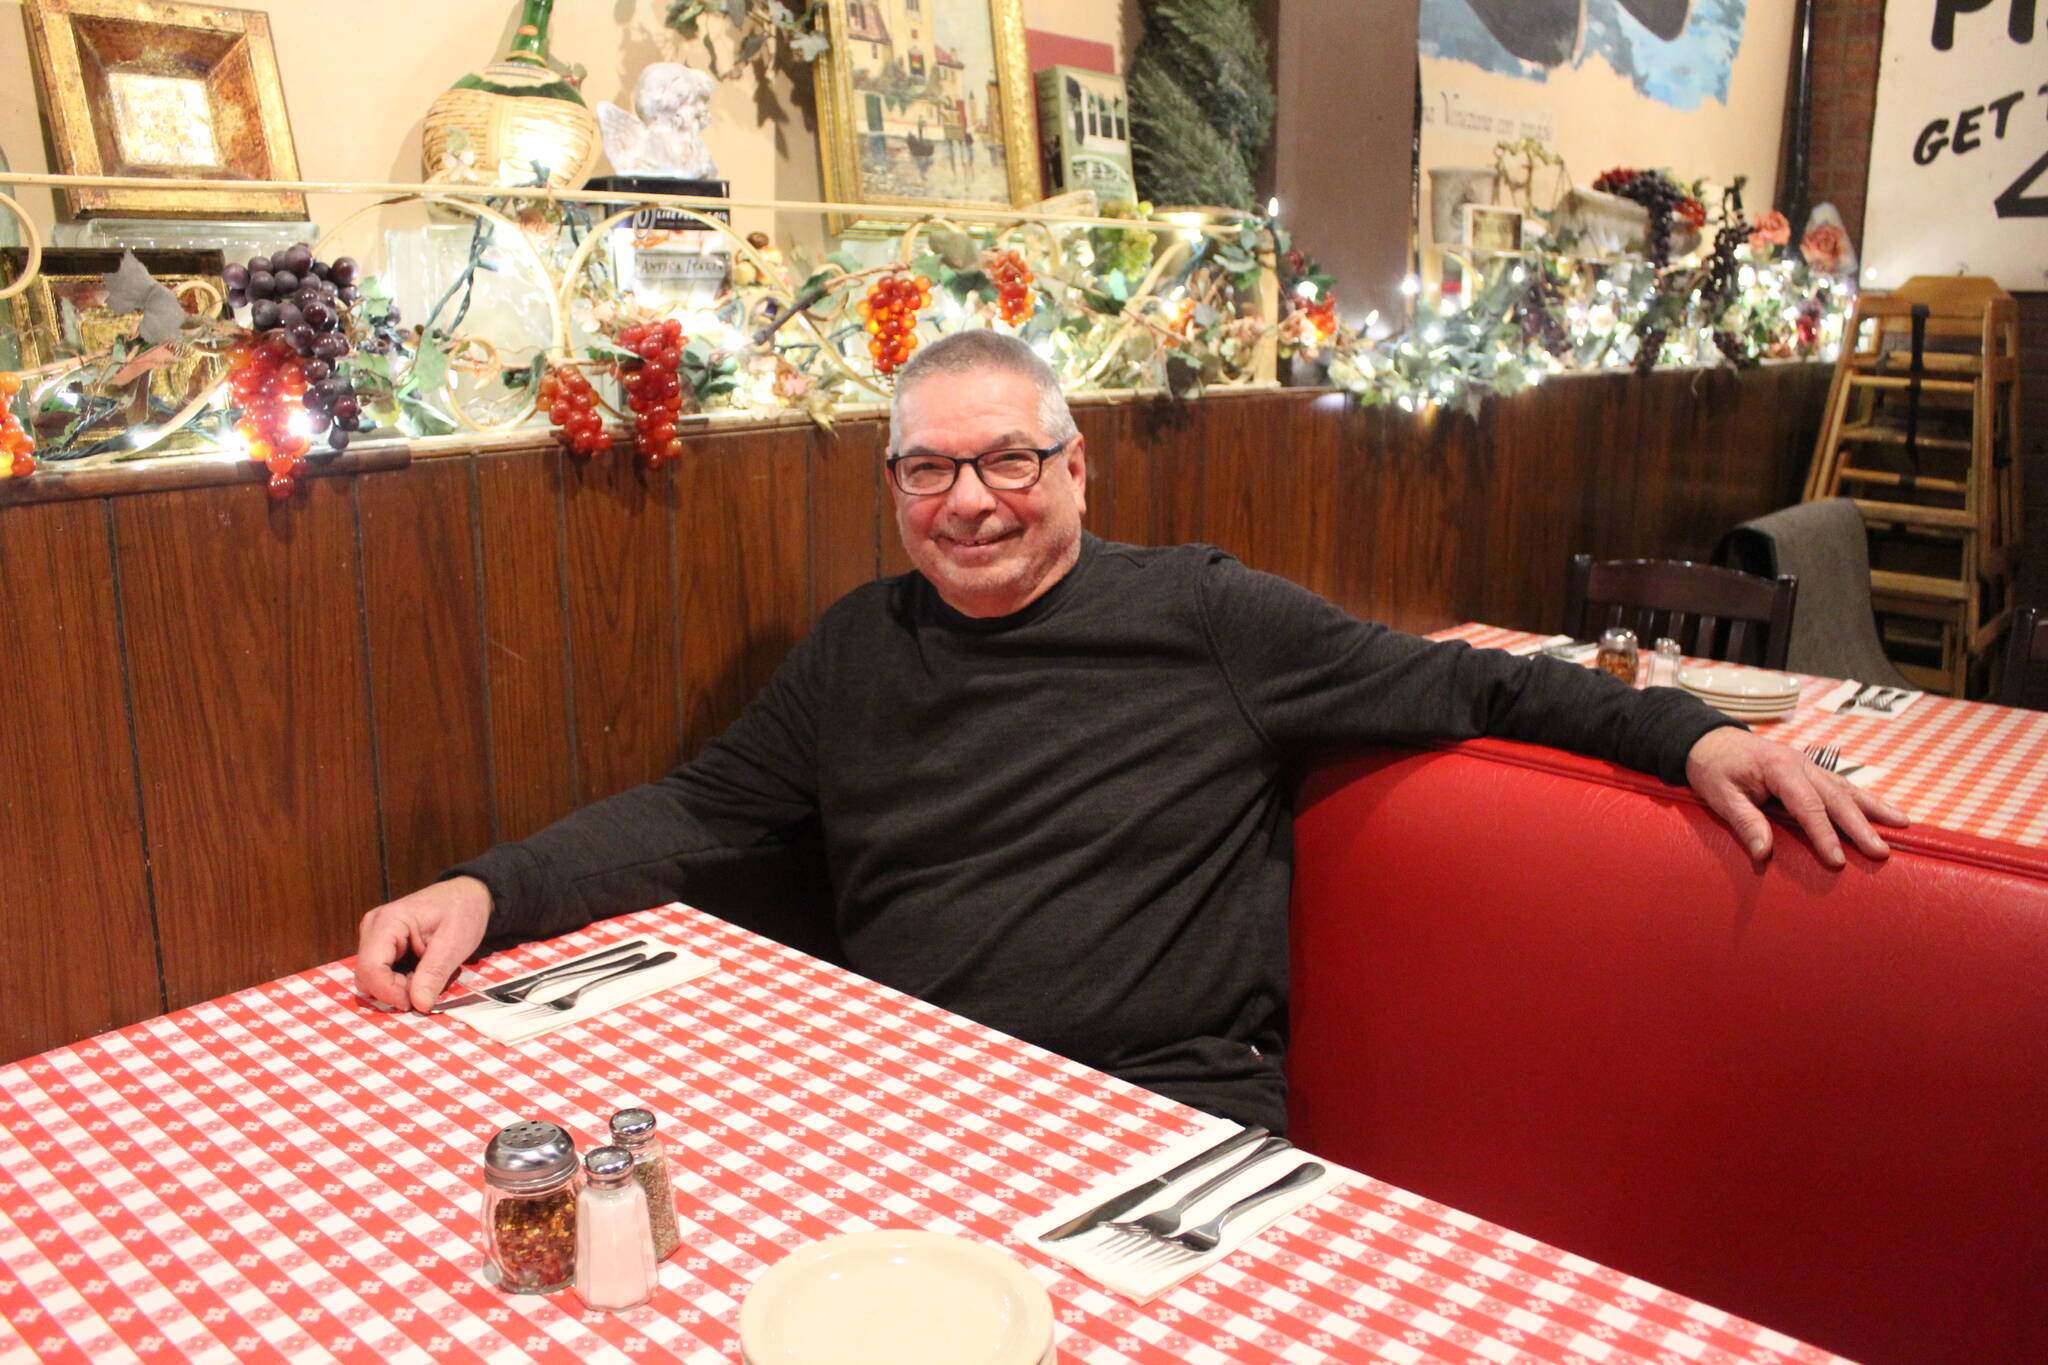 Even in retirement, Fred Martichuski still makes time to visit Vince’s on Sunset. Photo by Bailey Jo Josie/Sound Publishing.